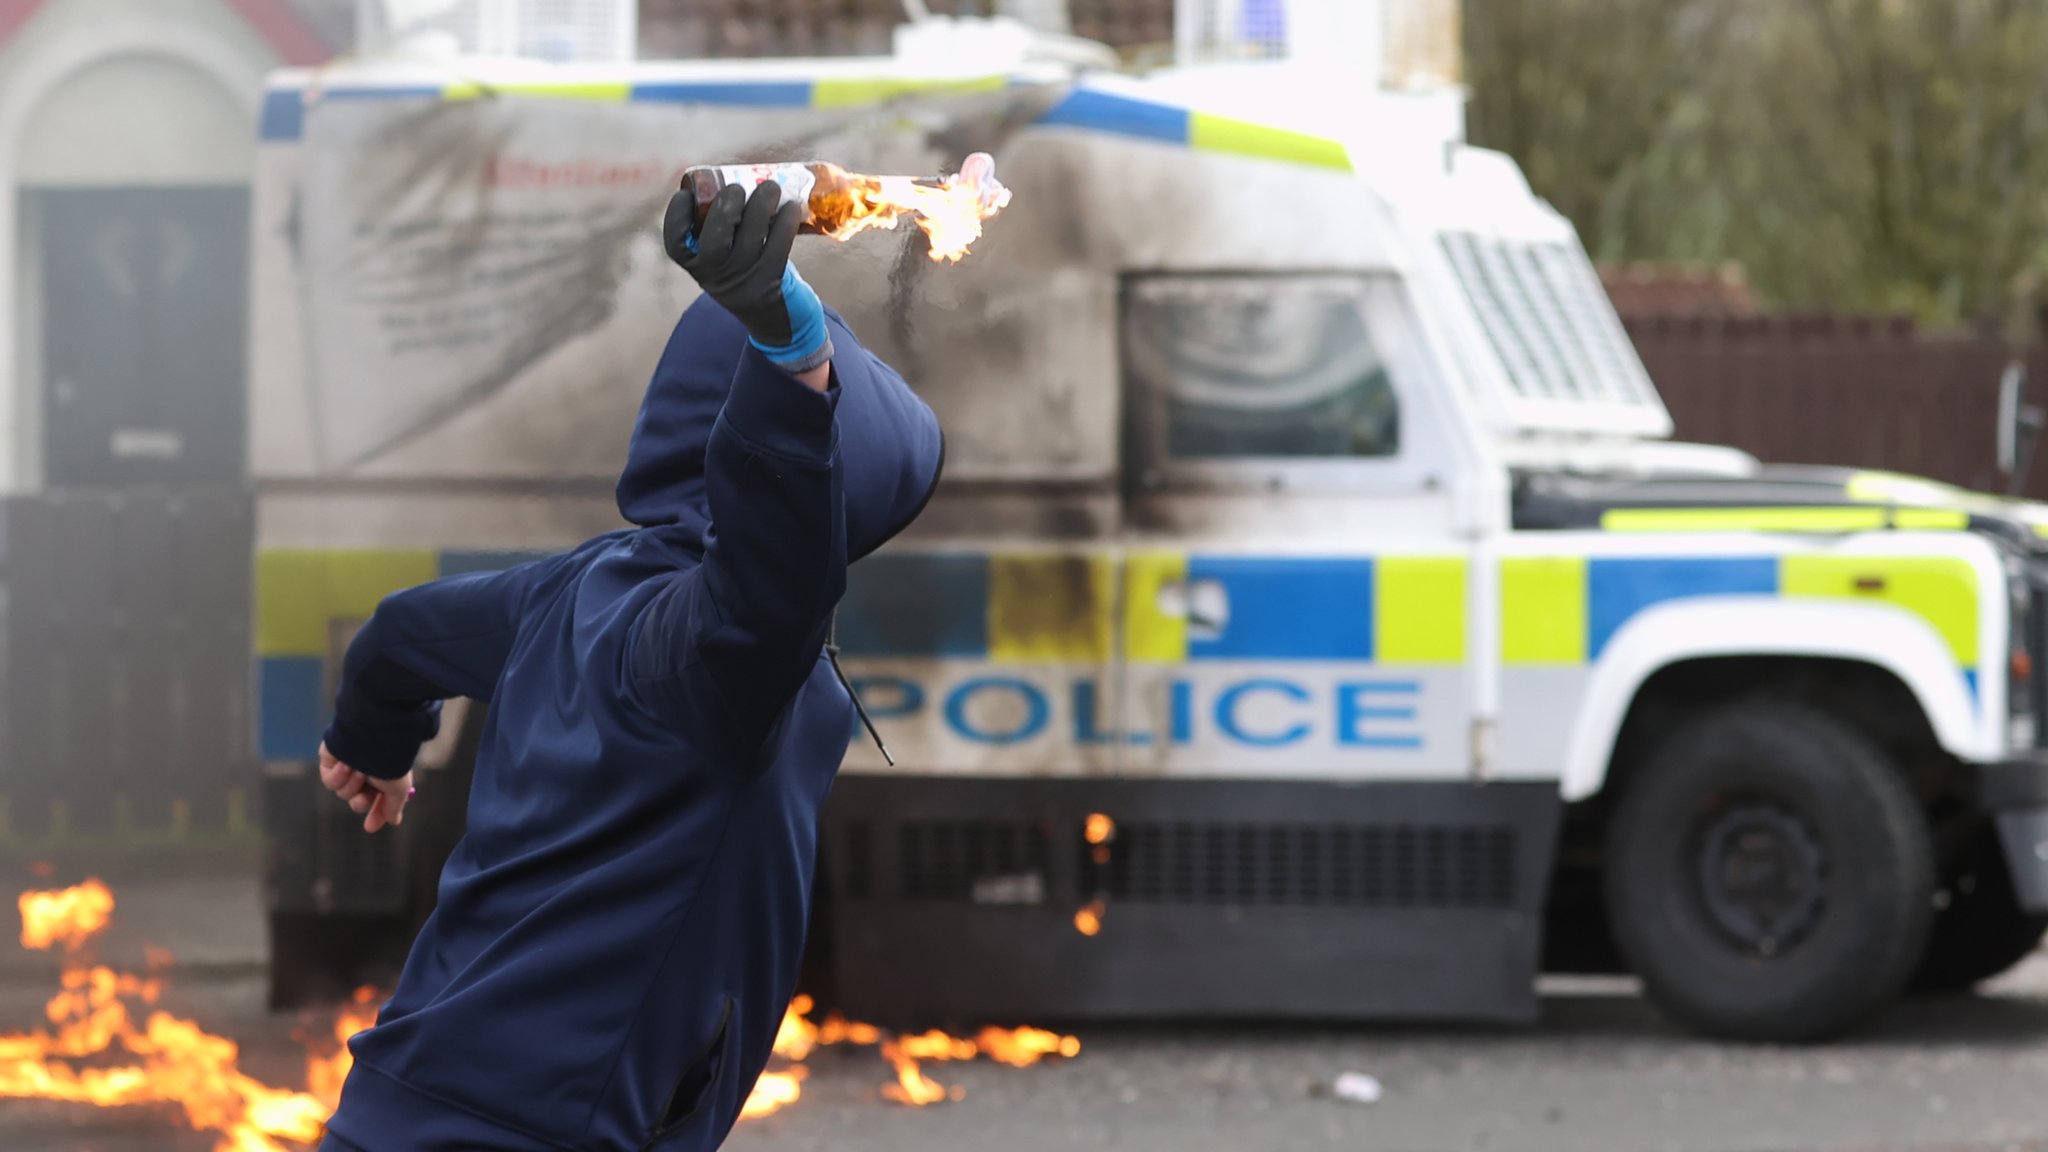 'Reckless' petrol bomb attack on Londonderry police